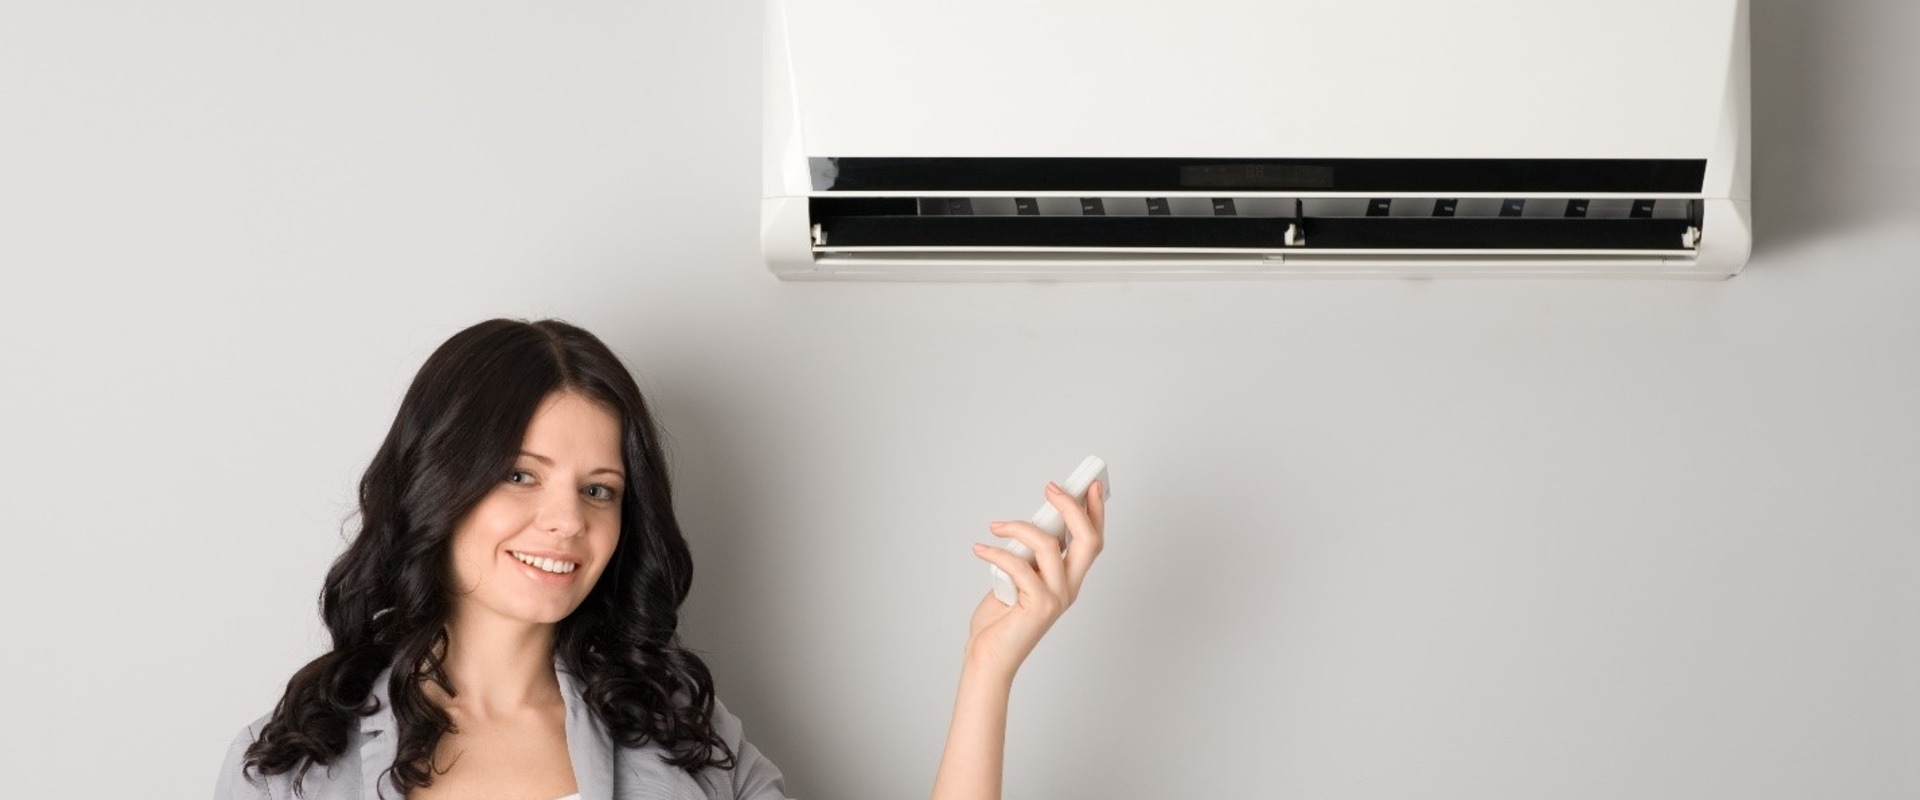 What is a ductless air conditioning unit?